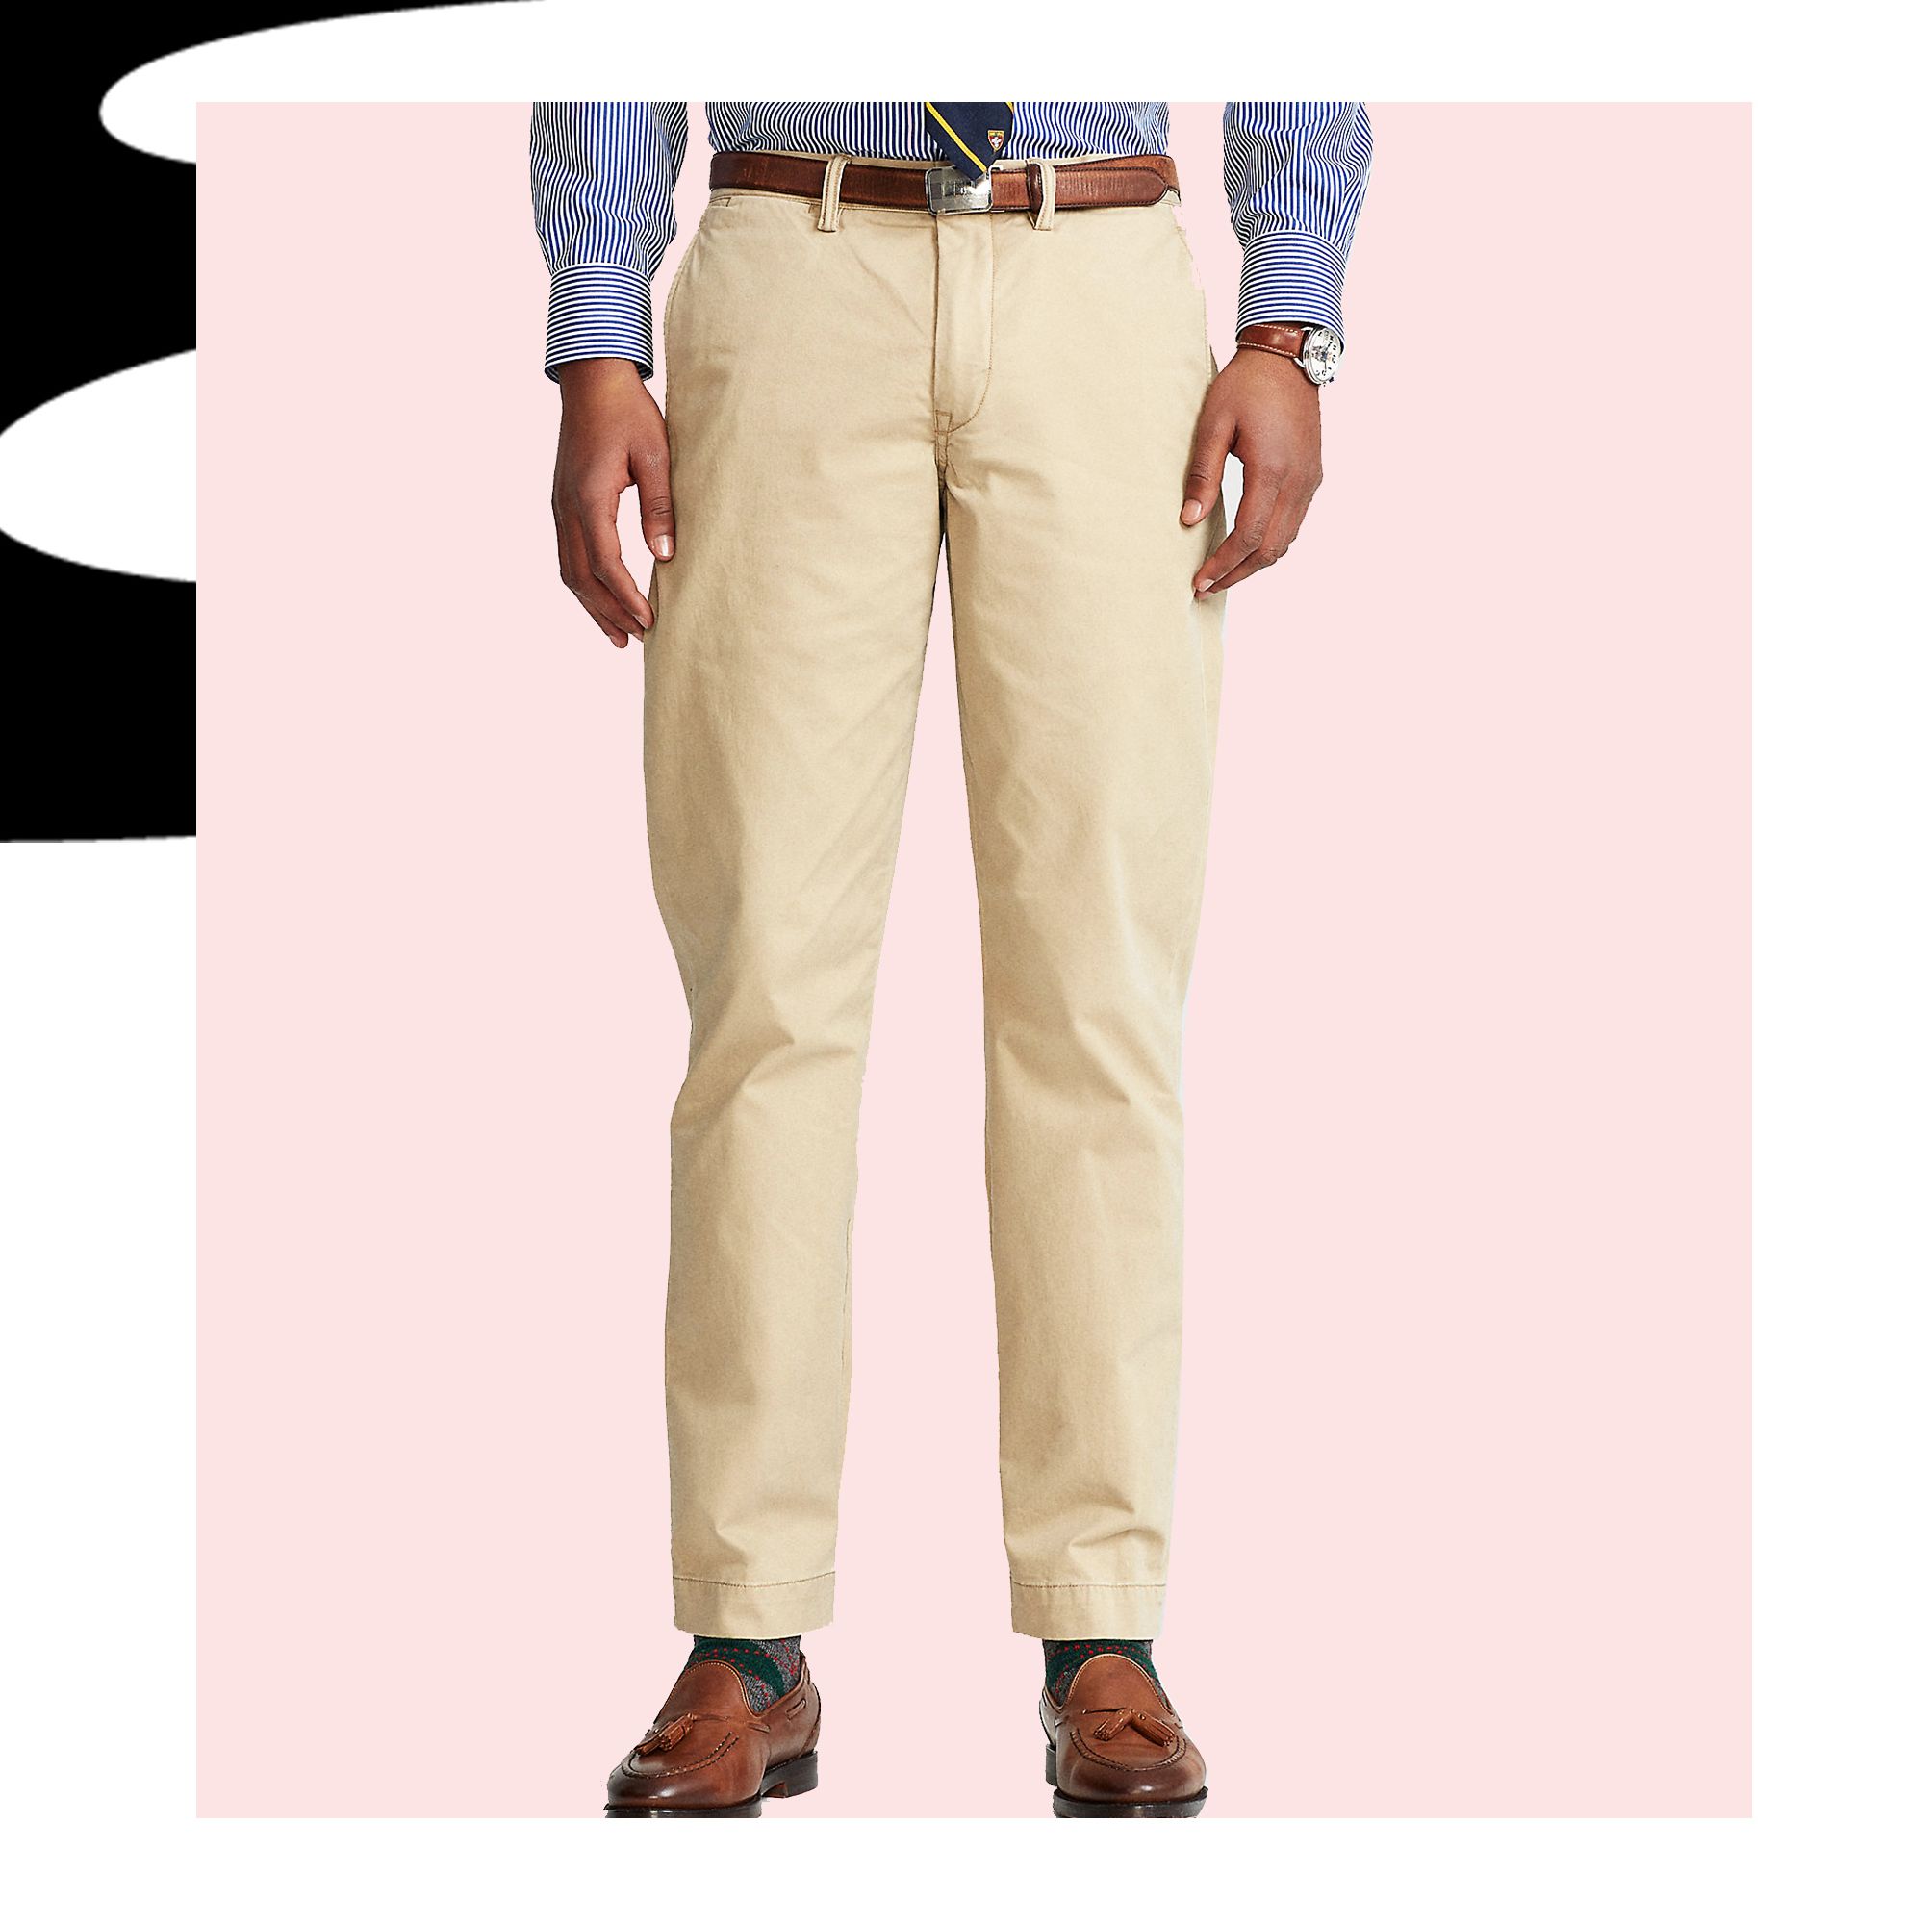 15 Great Pairs of Khaki Pants—All For Less Than $100